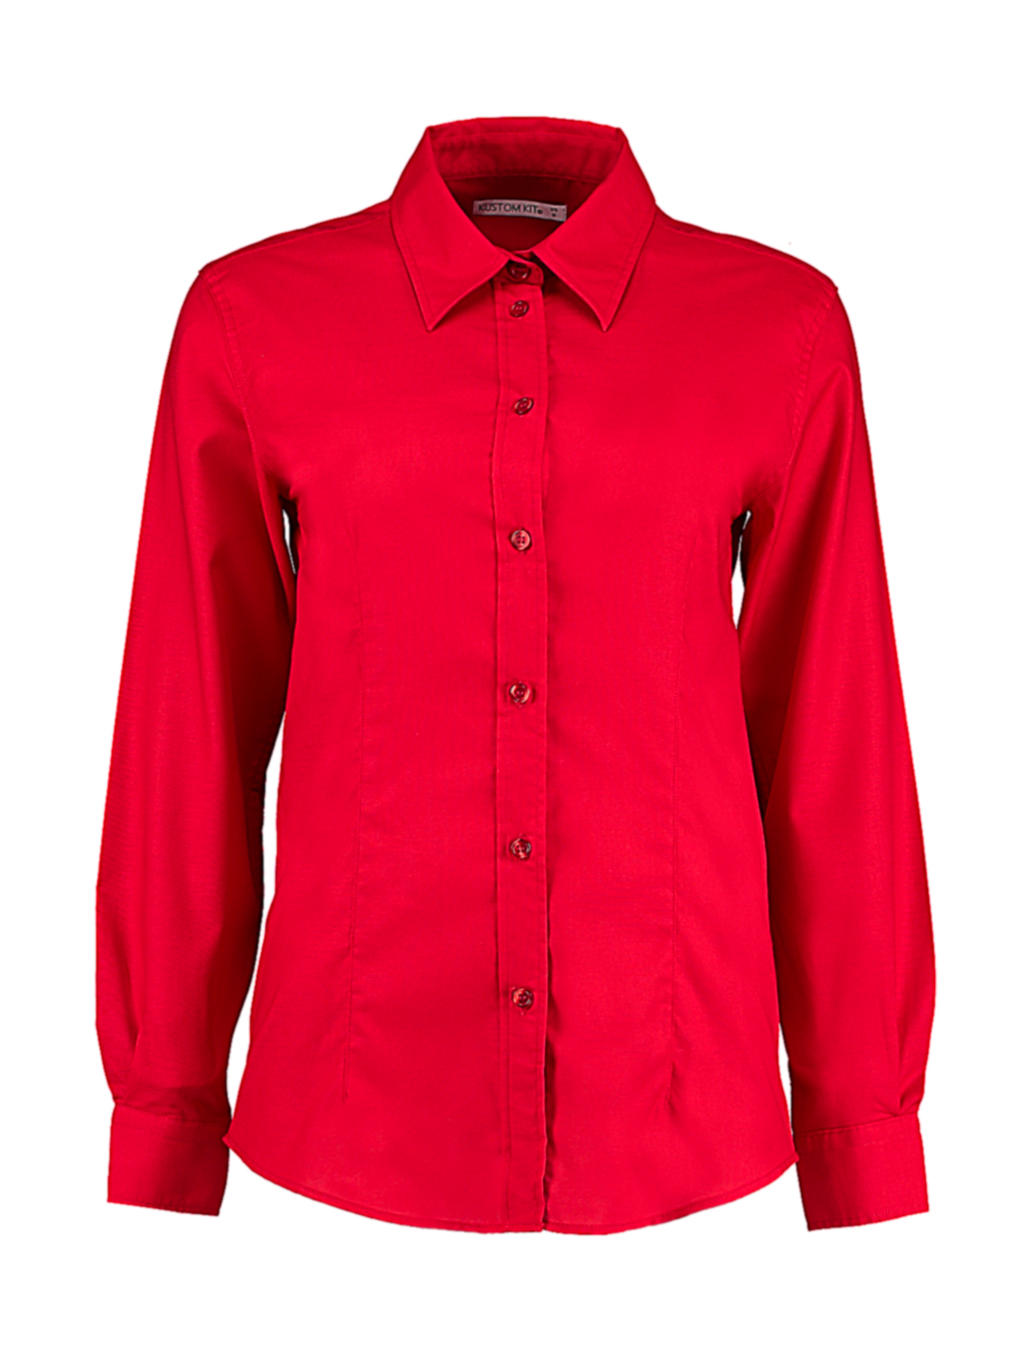  Womens Tailored Fit Workwear Oxford Shirt in Farbe Red